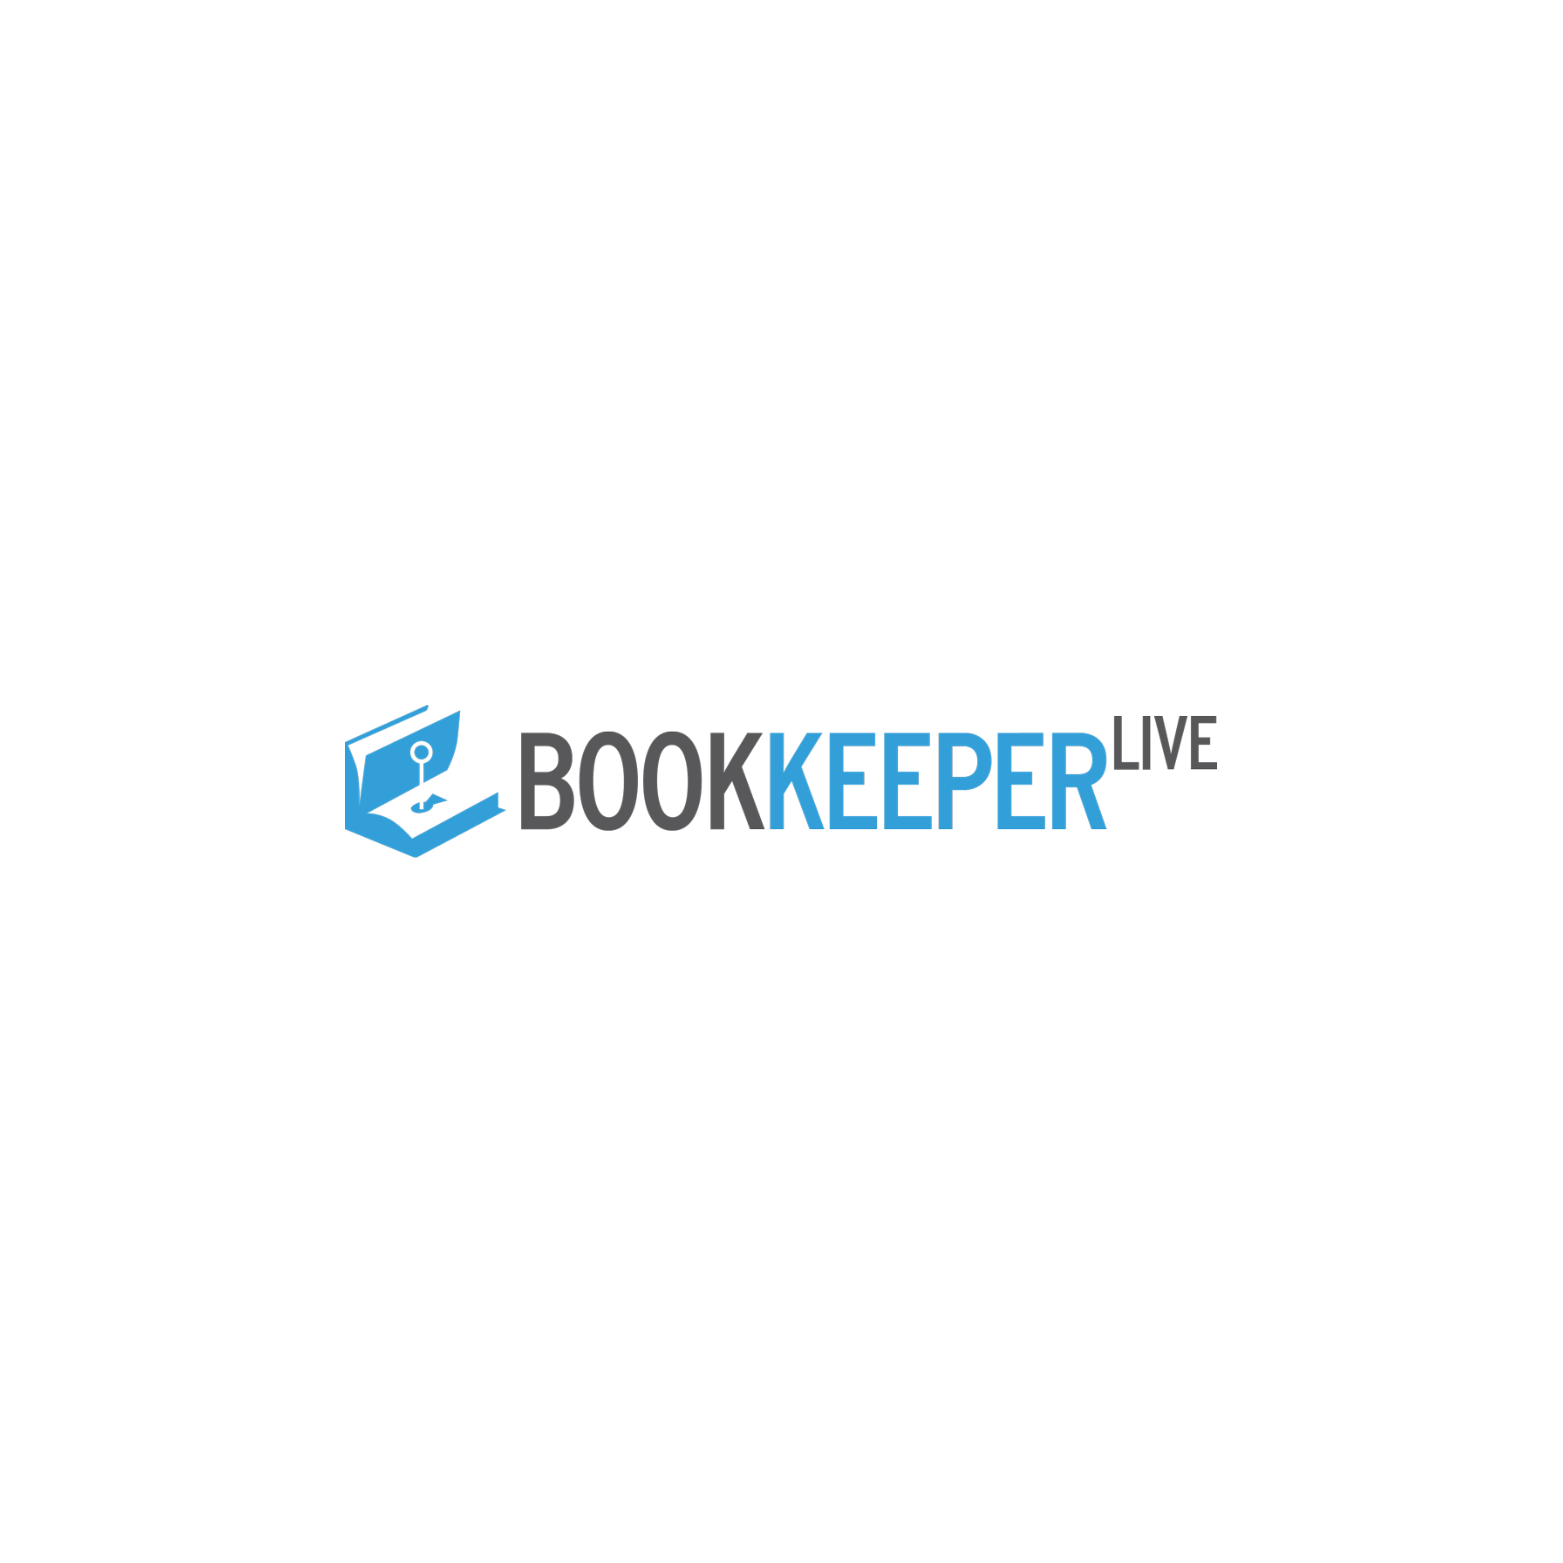 BookkeeperLive|Accounting Services|Professional Services